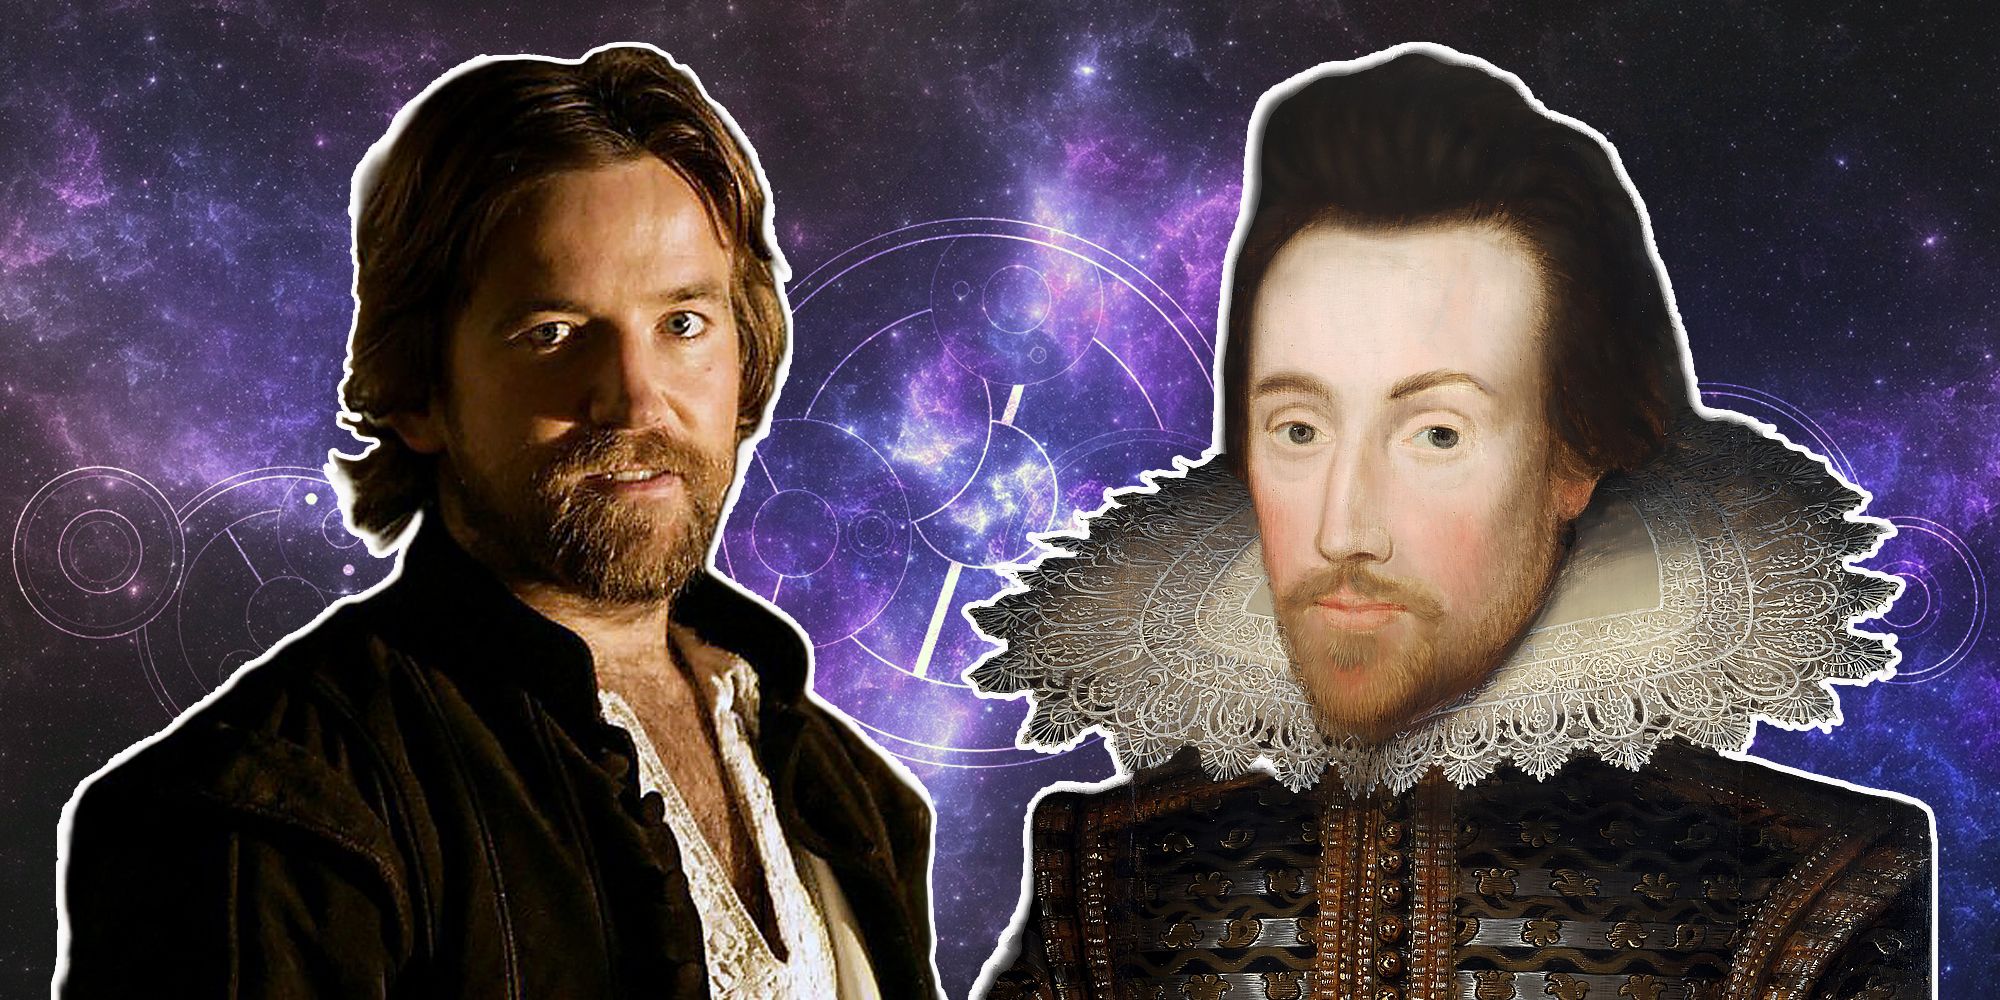 William Shakespeare (Dean Lennox Kelly) was influenced by a trio of alien witches